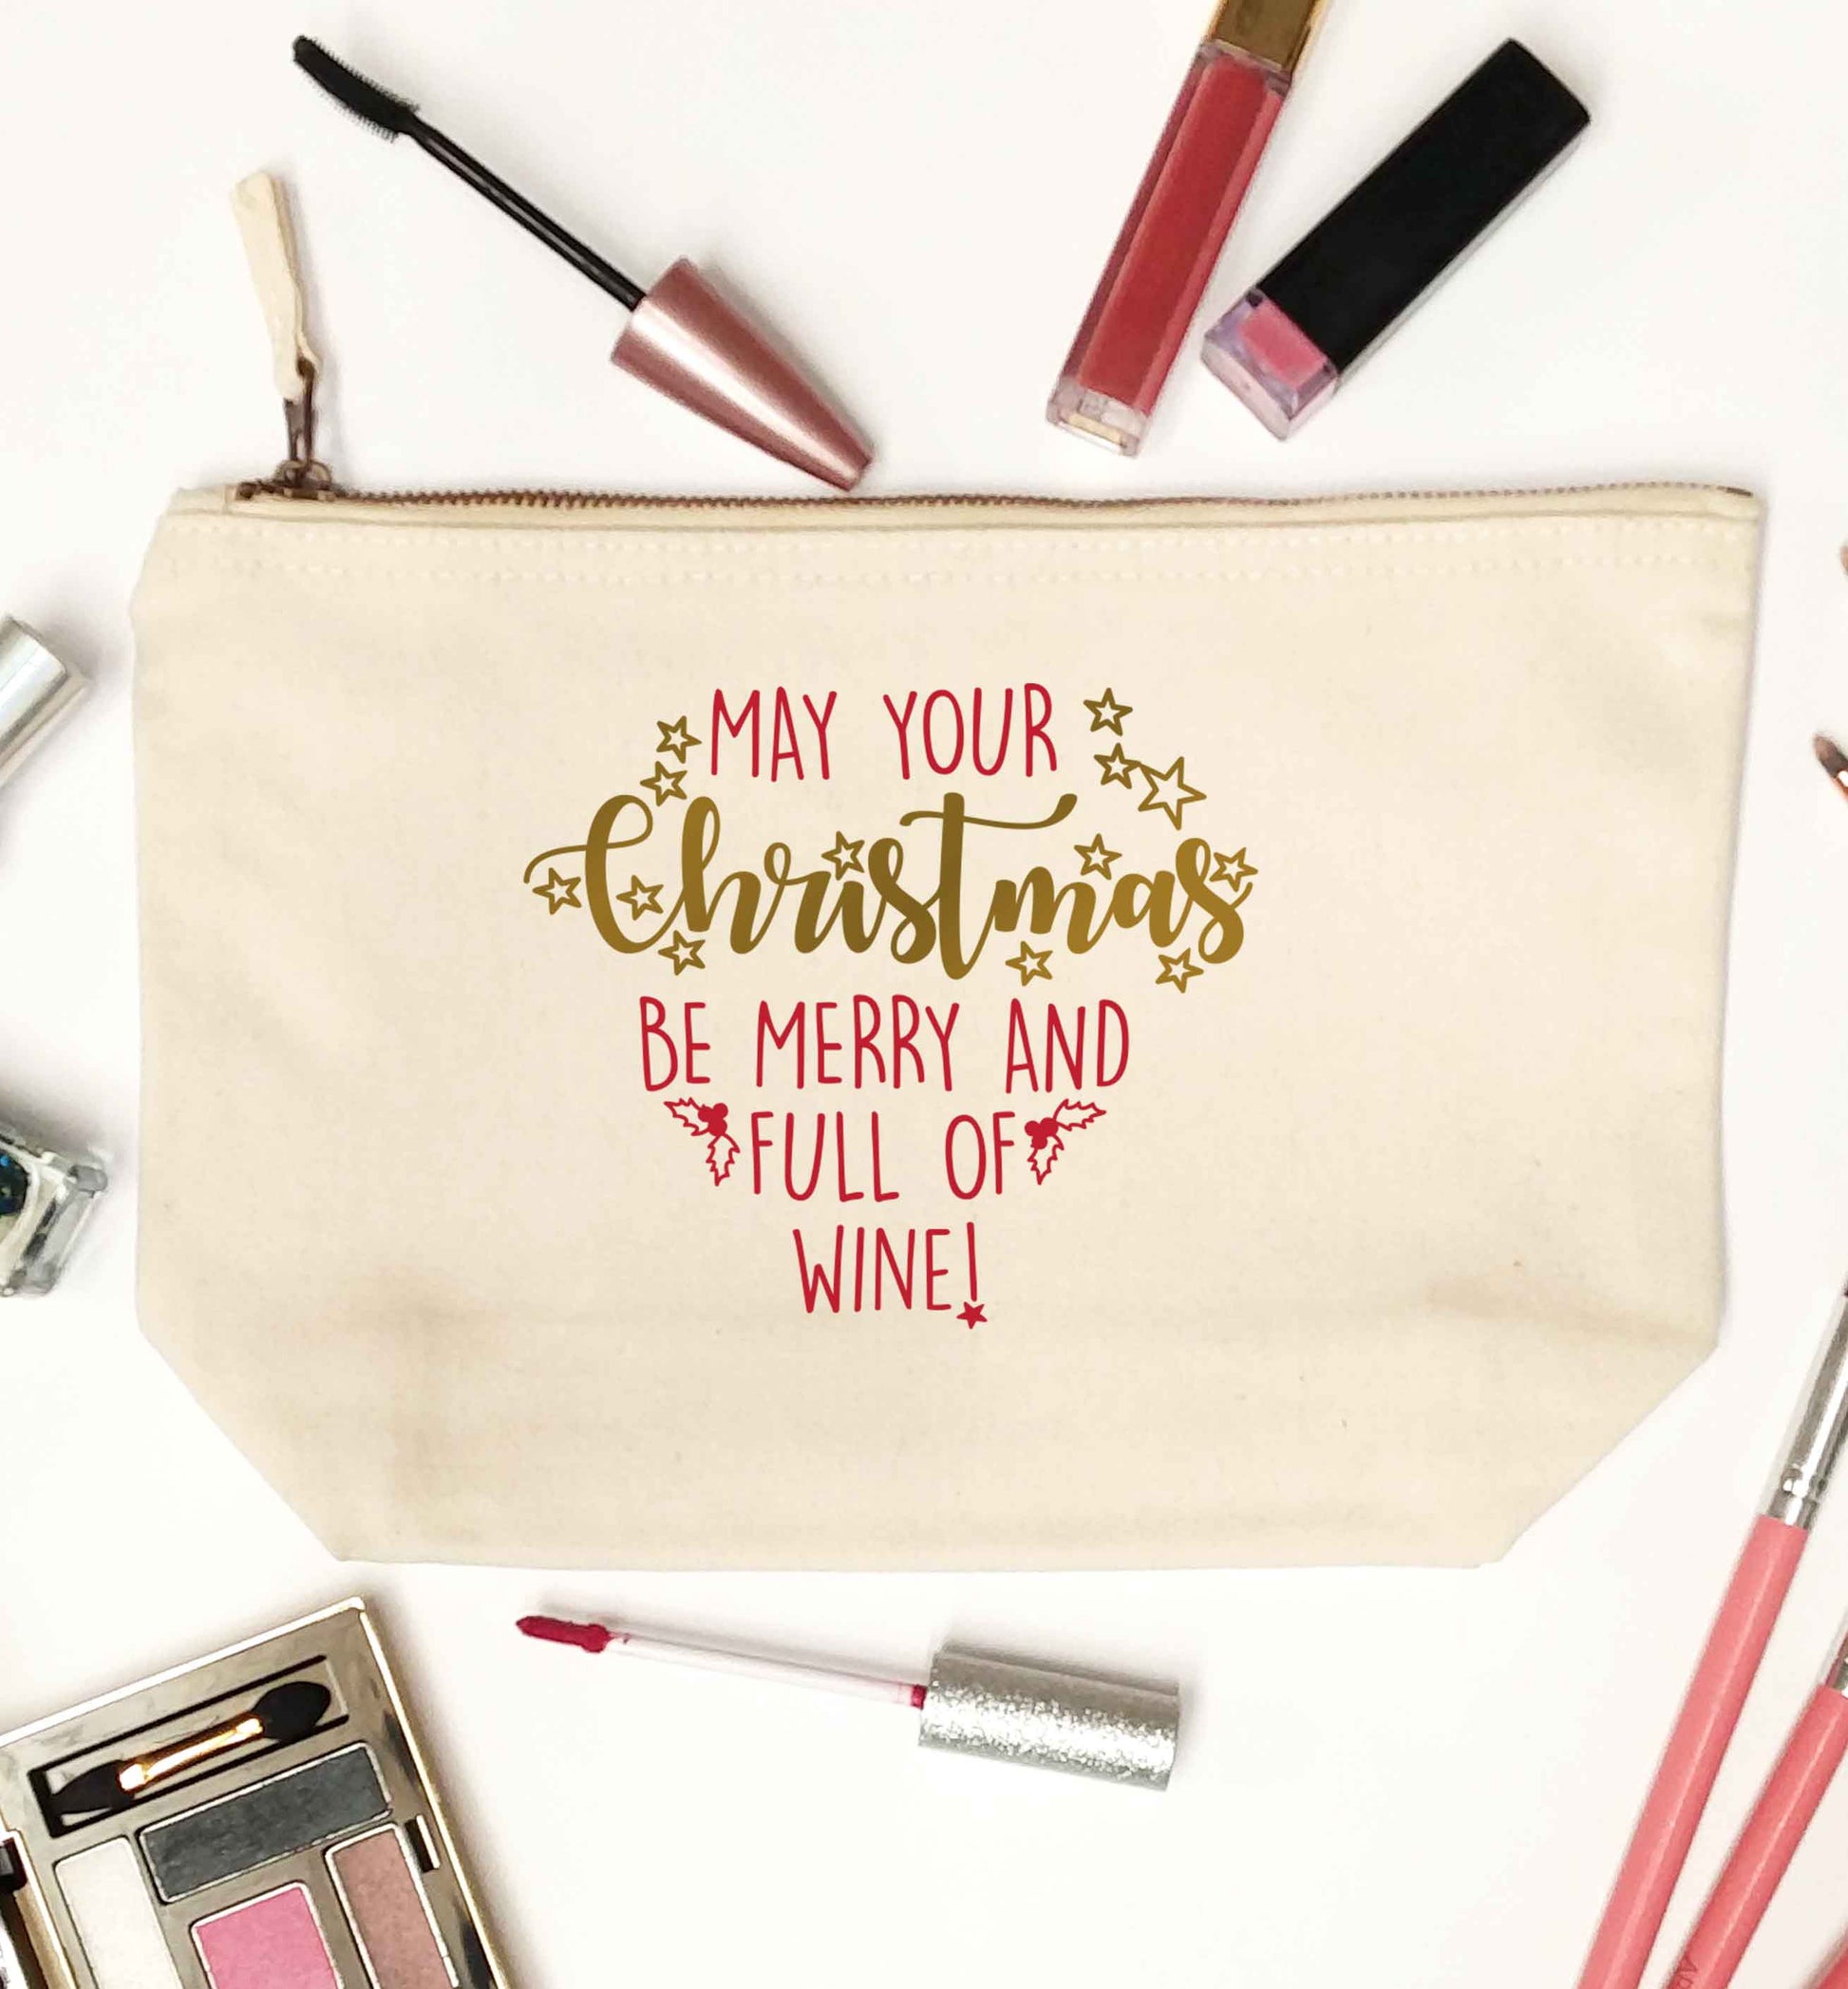 May your Christmas be merry and full of wine natural makeup bag